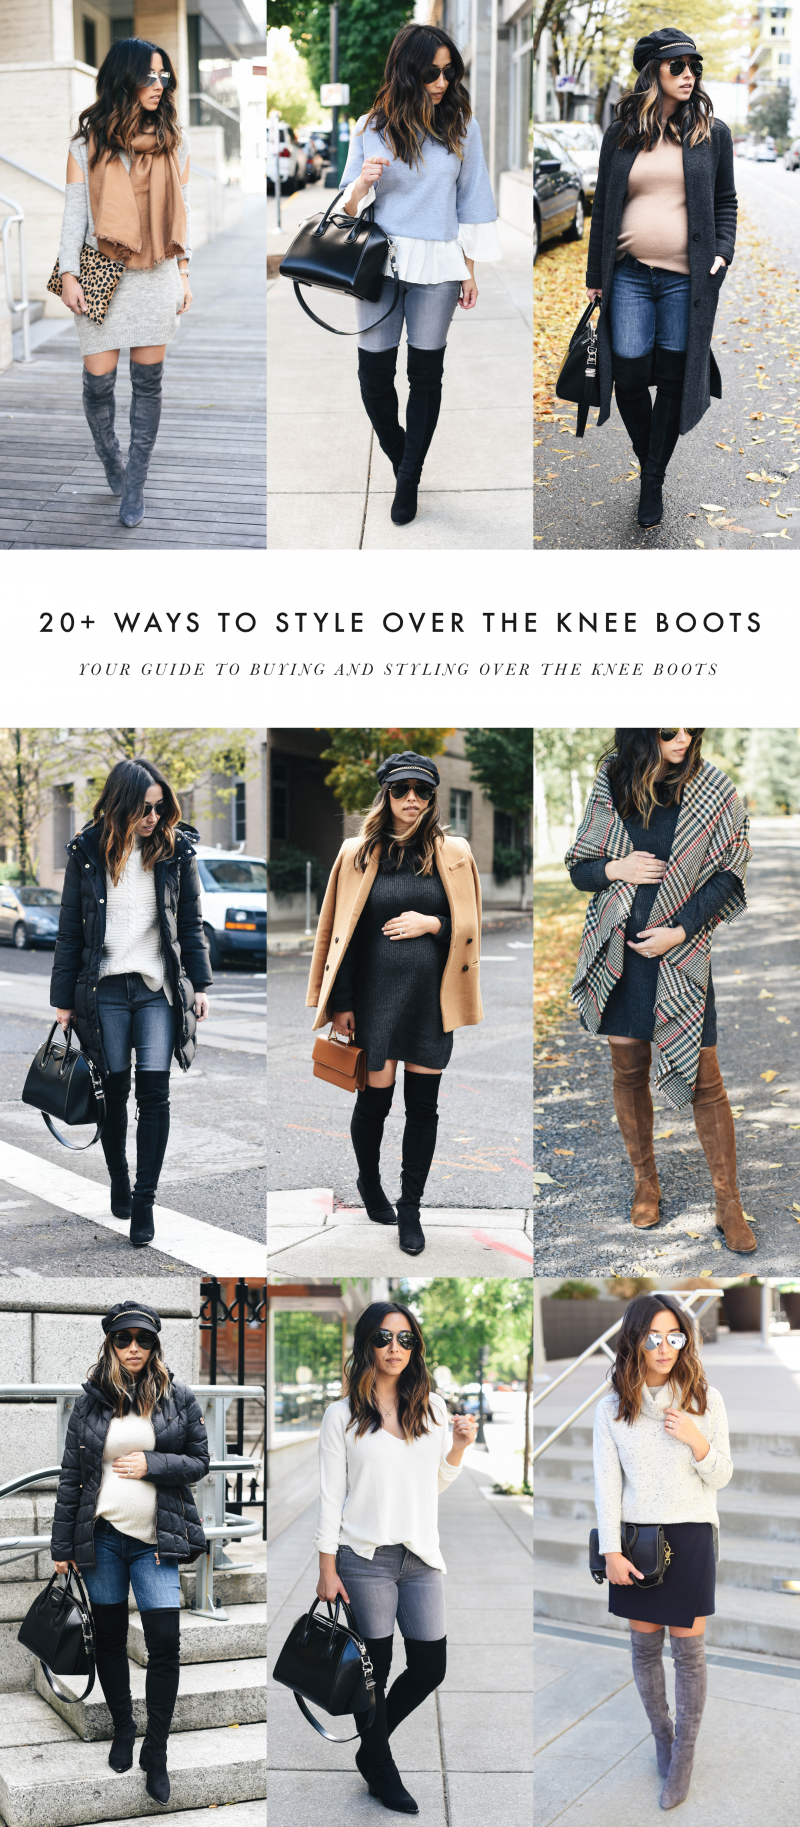 OVER THE KNEE BOOT STYLE GUIDE